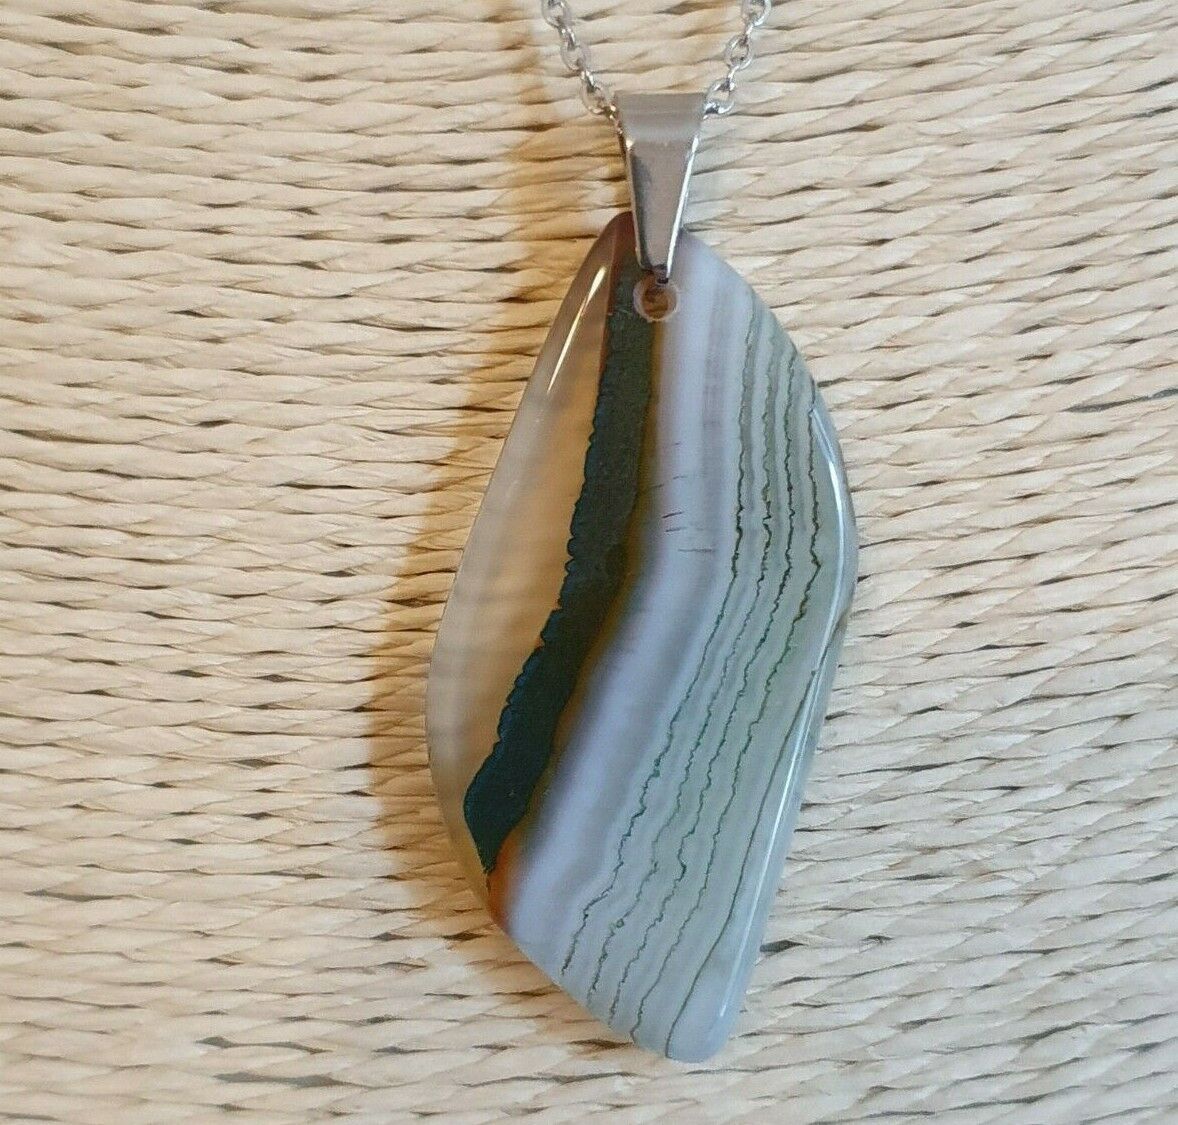 Green&White Stripes Onyx Agate Leaf Shape Pendant Stainless Steel Chain Necklace